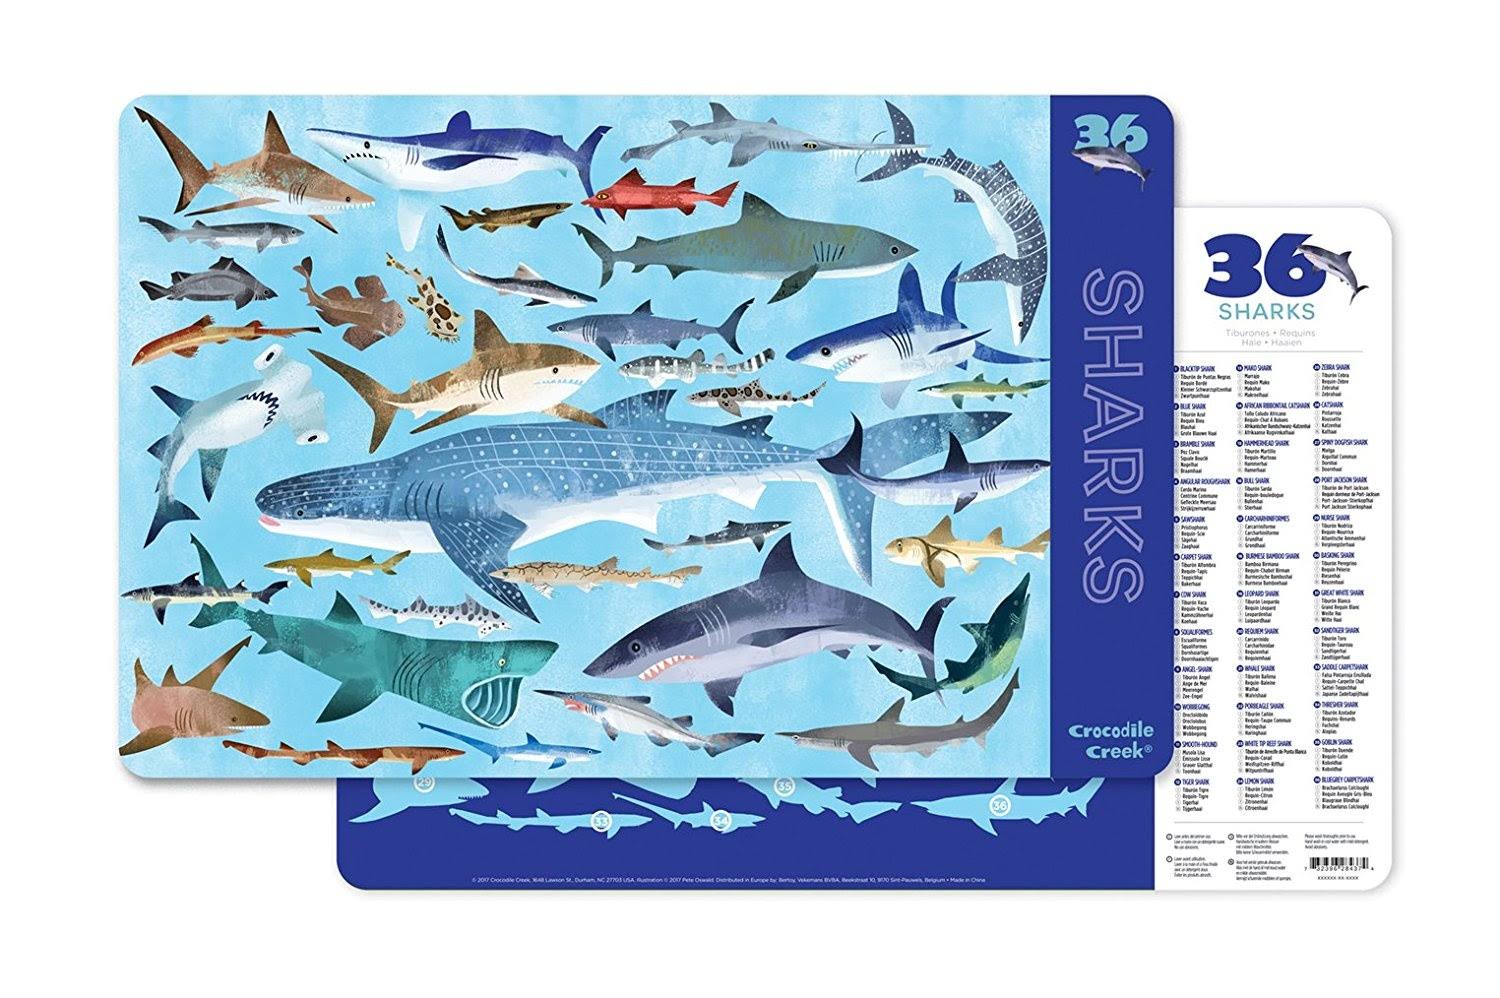 Crocodile Creek 36 Animals/Sharks 2-Sided Placemat Children's, Blue, Green, Teal, Grey, Red | Furniture